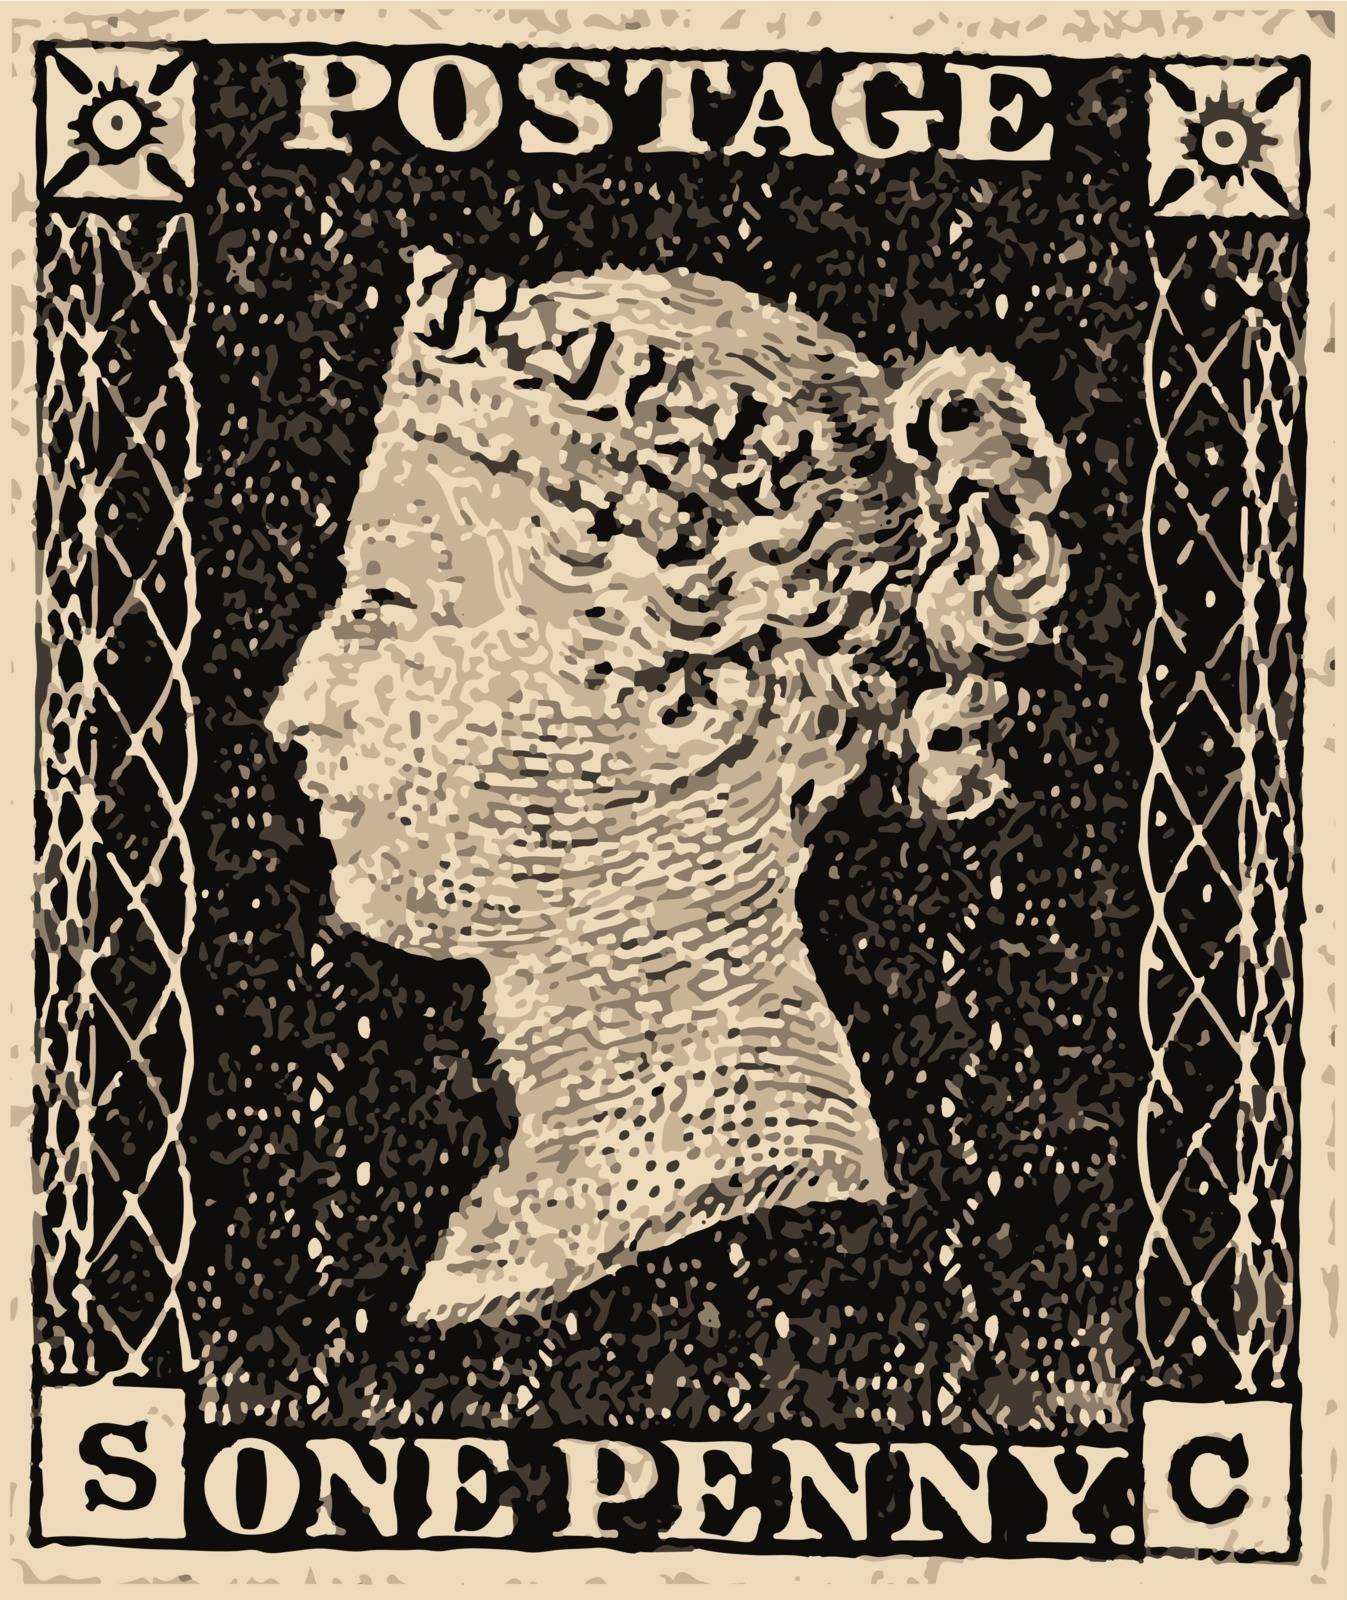 A typical victorian penny black british stamp